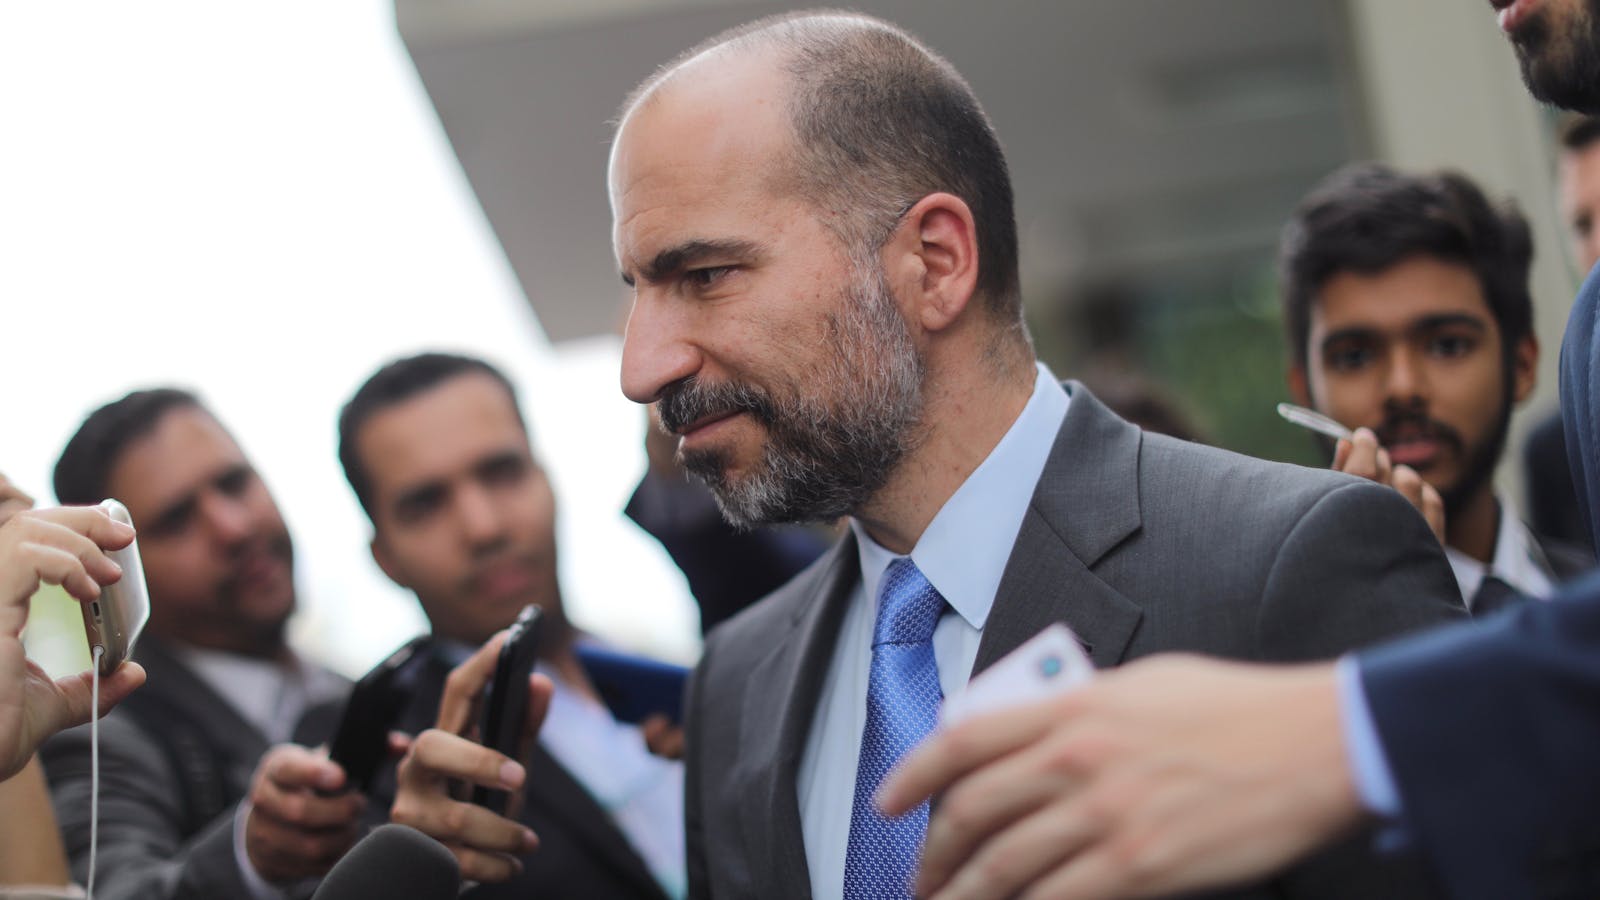 Uber CEO Dara Khosrowshahi after a meeting with Brazil's Finance Minister last month. Photo by Bloomberg.